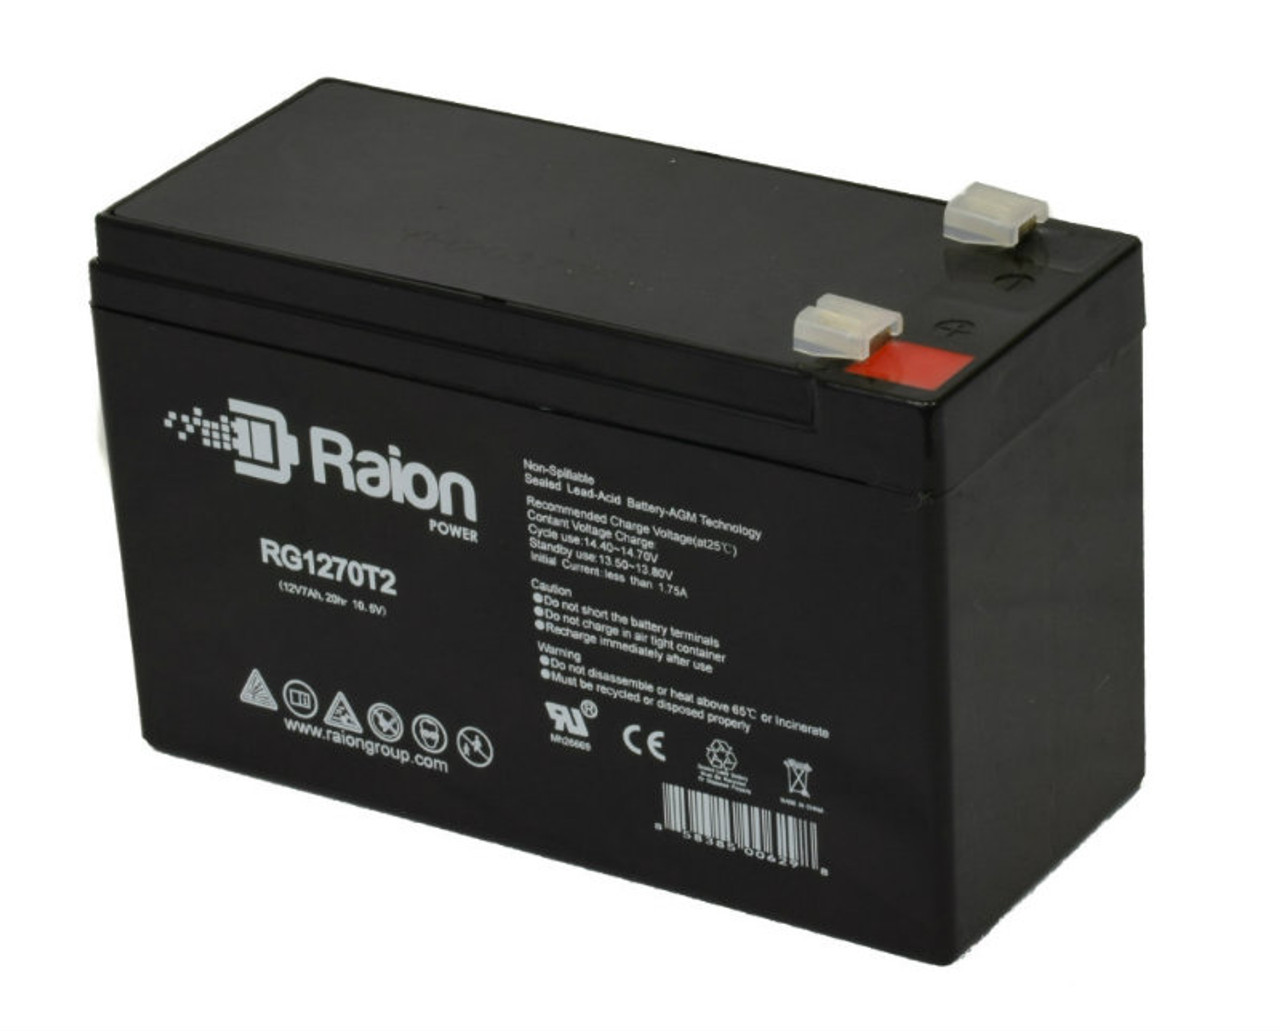 Raion Power Replacement 12V 7Ah Battery for Narco Anesthesia Machine GS Narkomed - 1 Pack